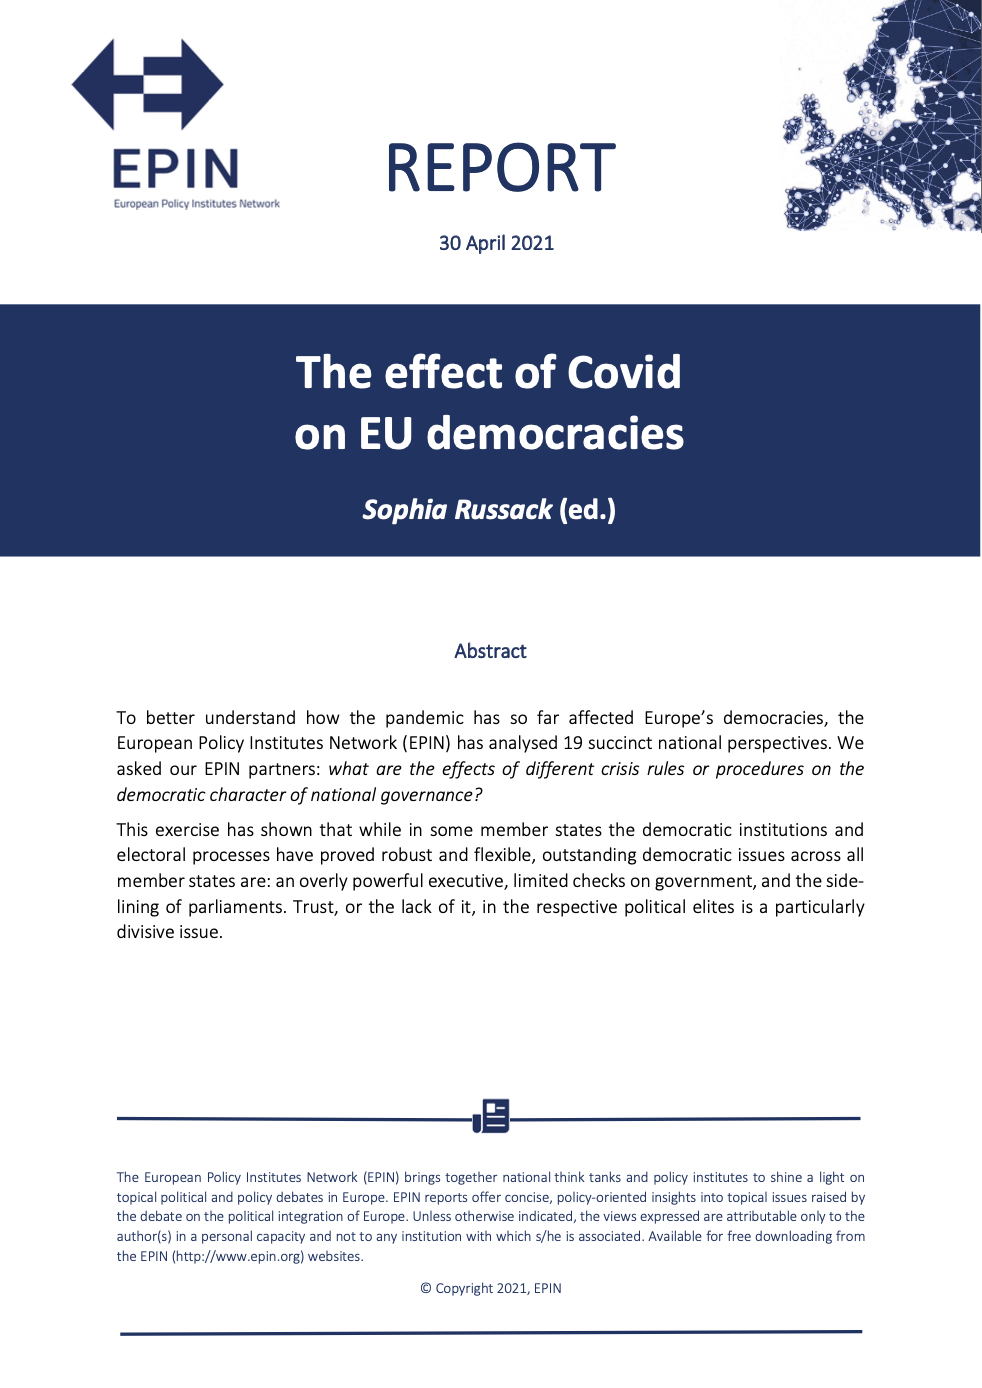 EPIN Report: The effect of Covid on EU democracies 